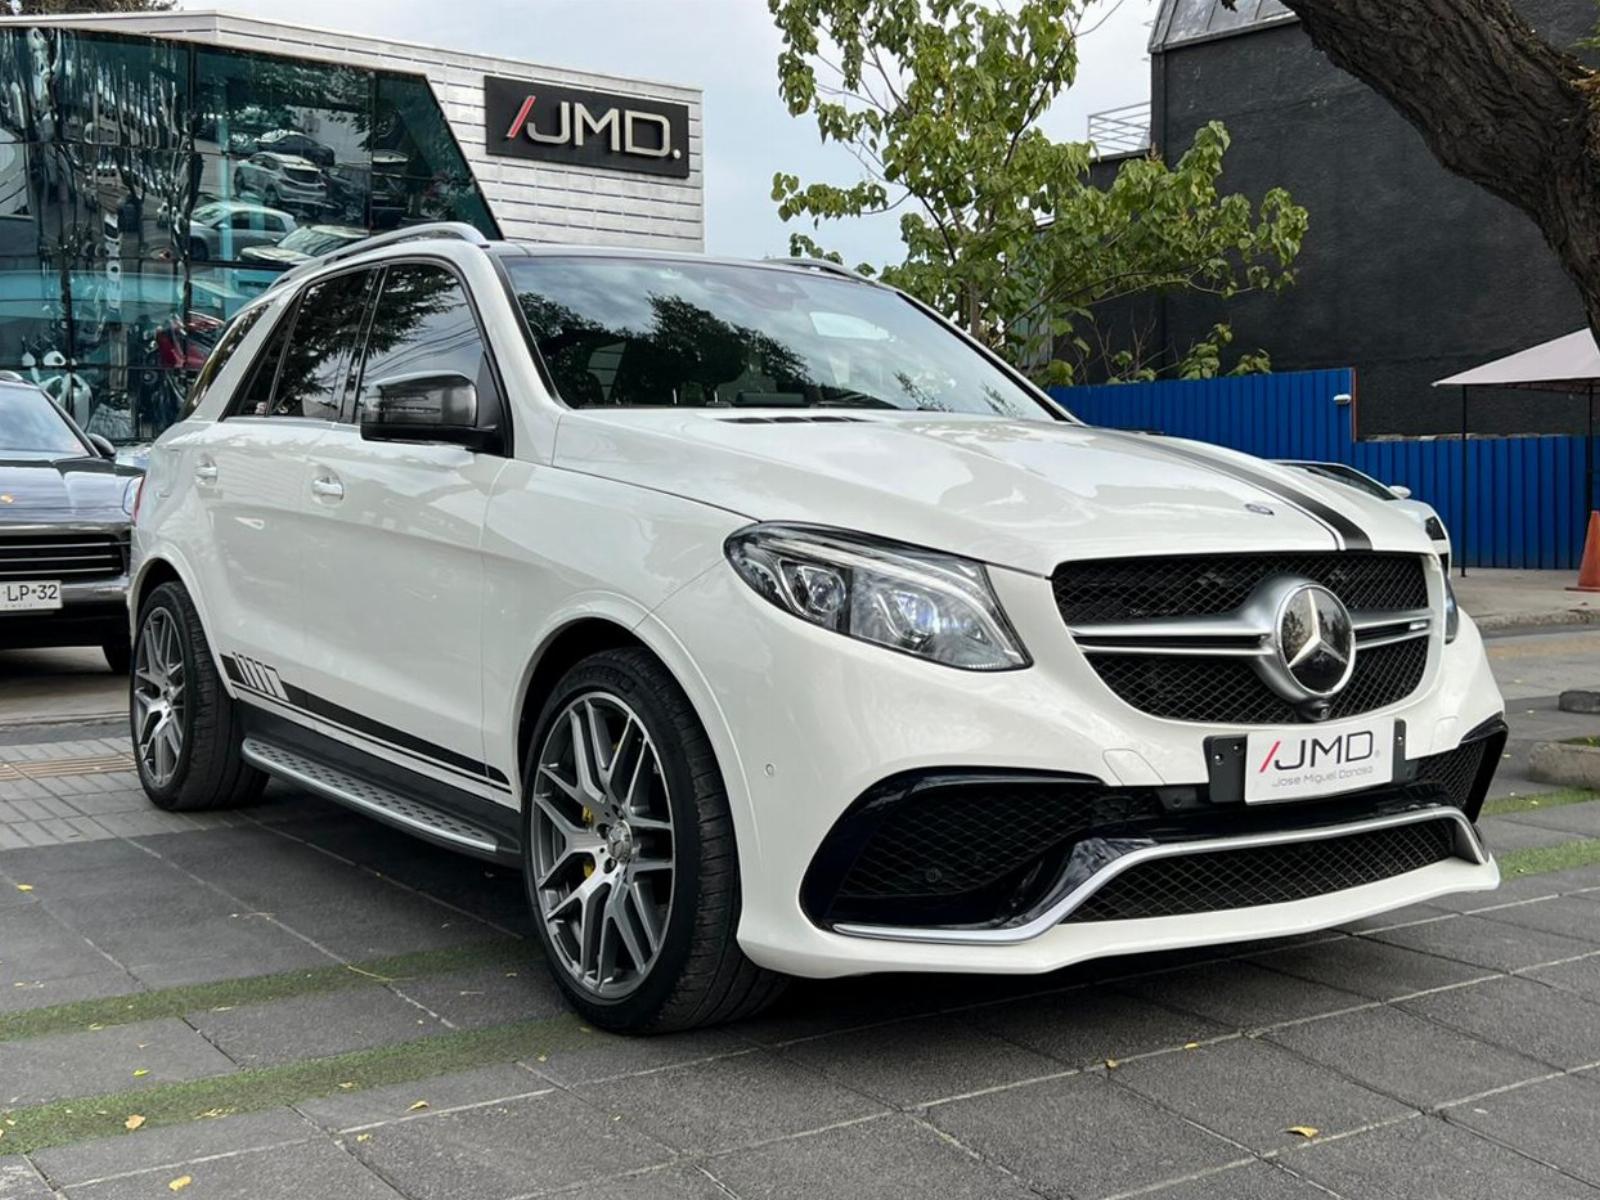 MERCEDES-BENZ GLE 63 S AMG AMG GLE 63 S  2017 EQUIPO EXTRA  - JMD AUTOS